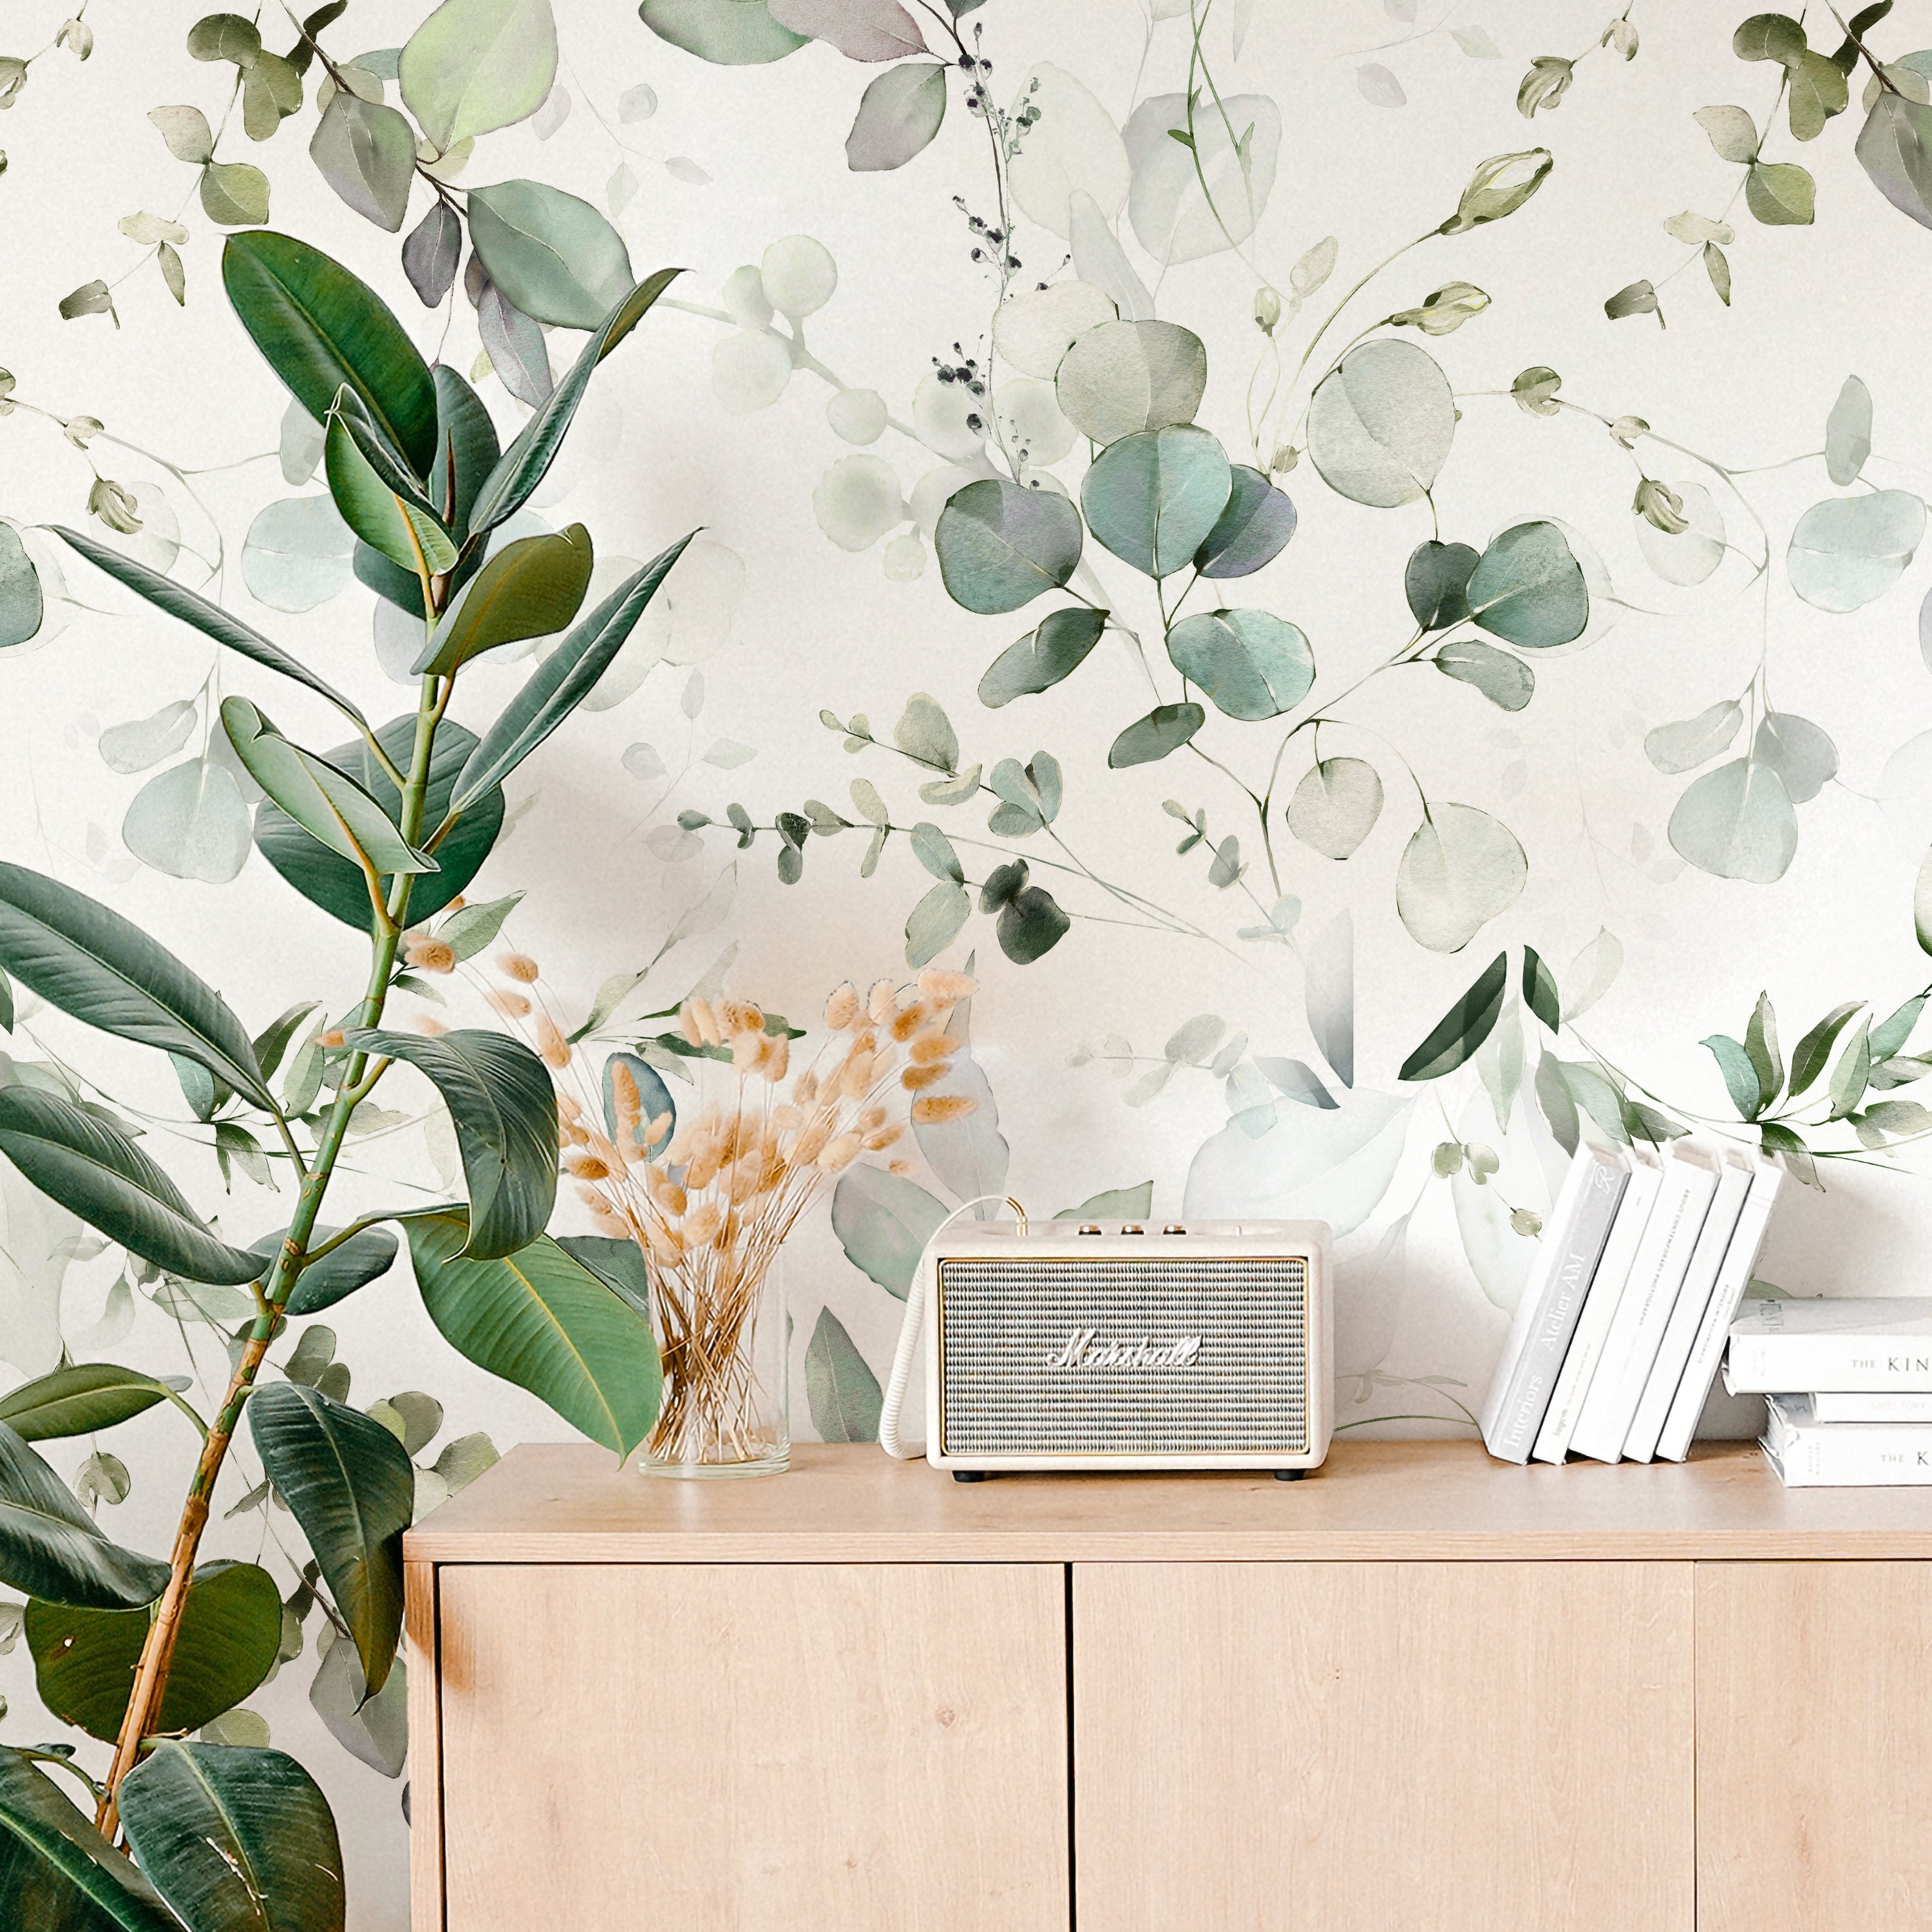 A cozy corner featuring the Eucalyptus Wallpaper as a backdrop to a wooden sideboard adorned with a vintage radio, decorative wheat stalks in a vase, books, and a flourishing potted plant that complements the wallpaper's botanical theme.